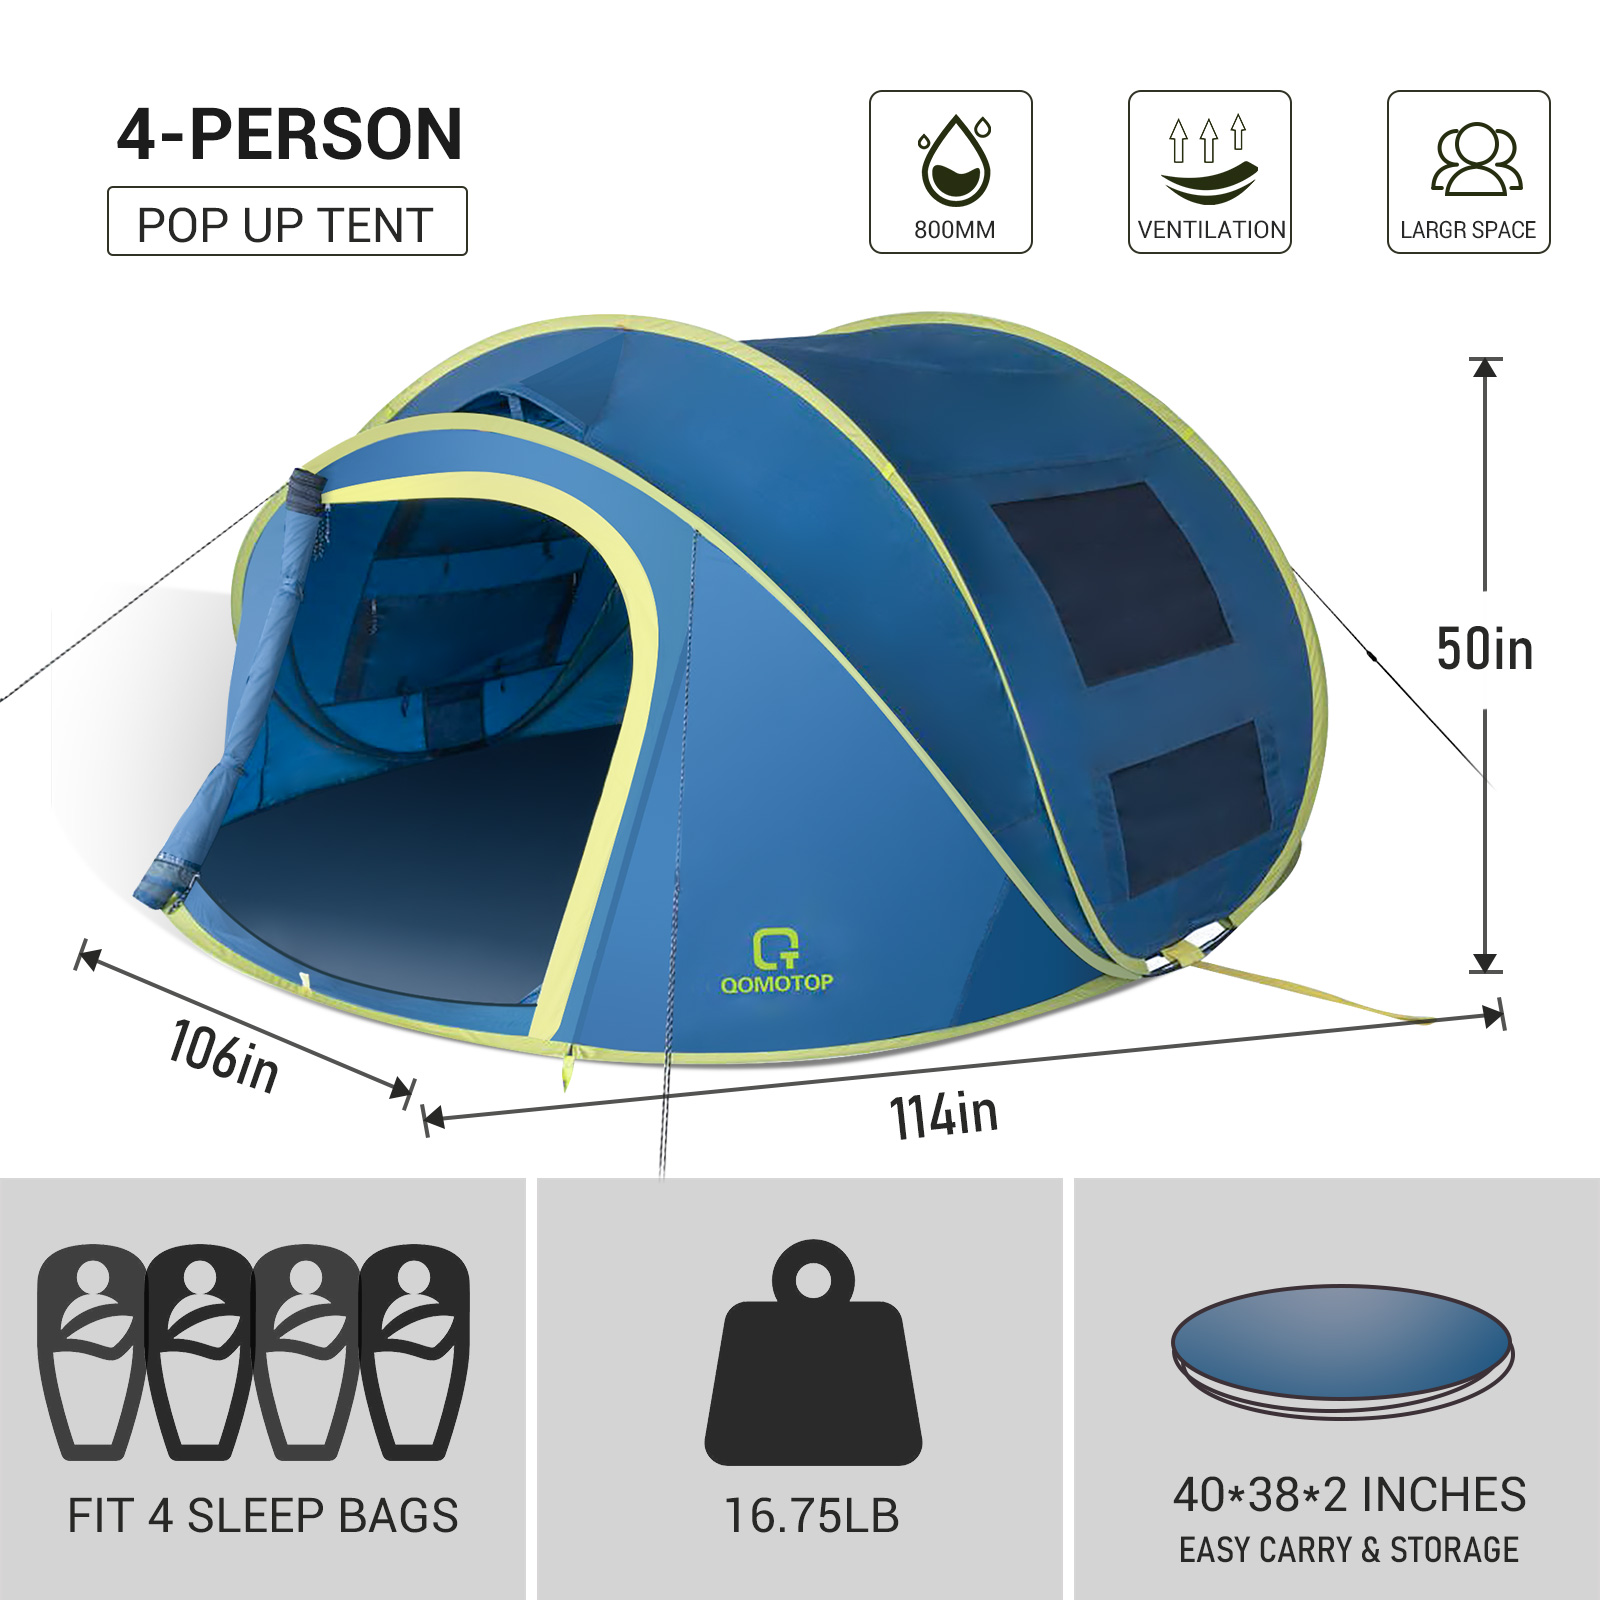 QOMOTOP Instant Tent 4-Person Camp Tent, Automatic Setup Pop Up Tent, Waterproof, Huge Side Screen Windows, Blue - image 5 of 8